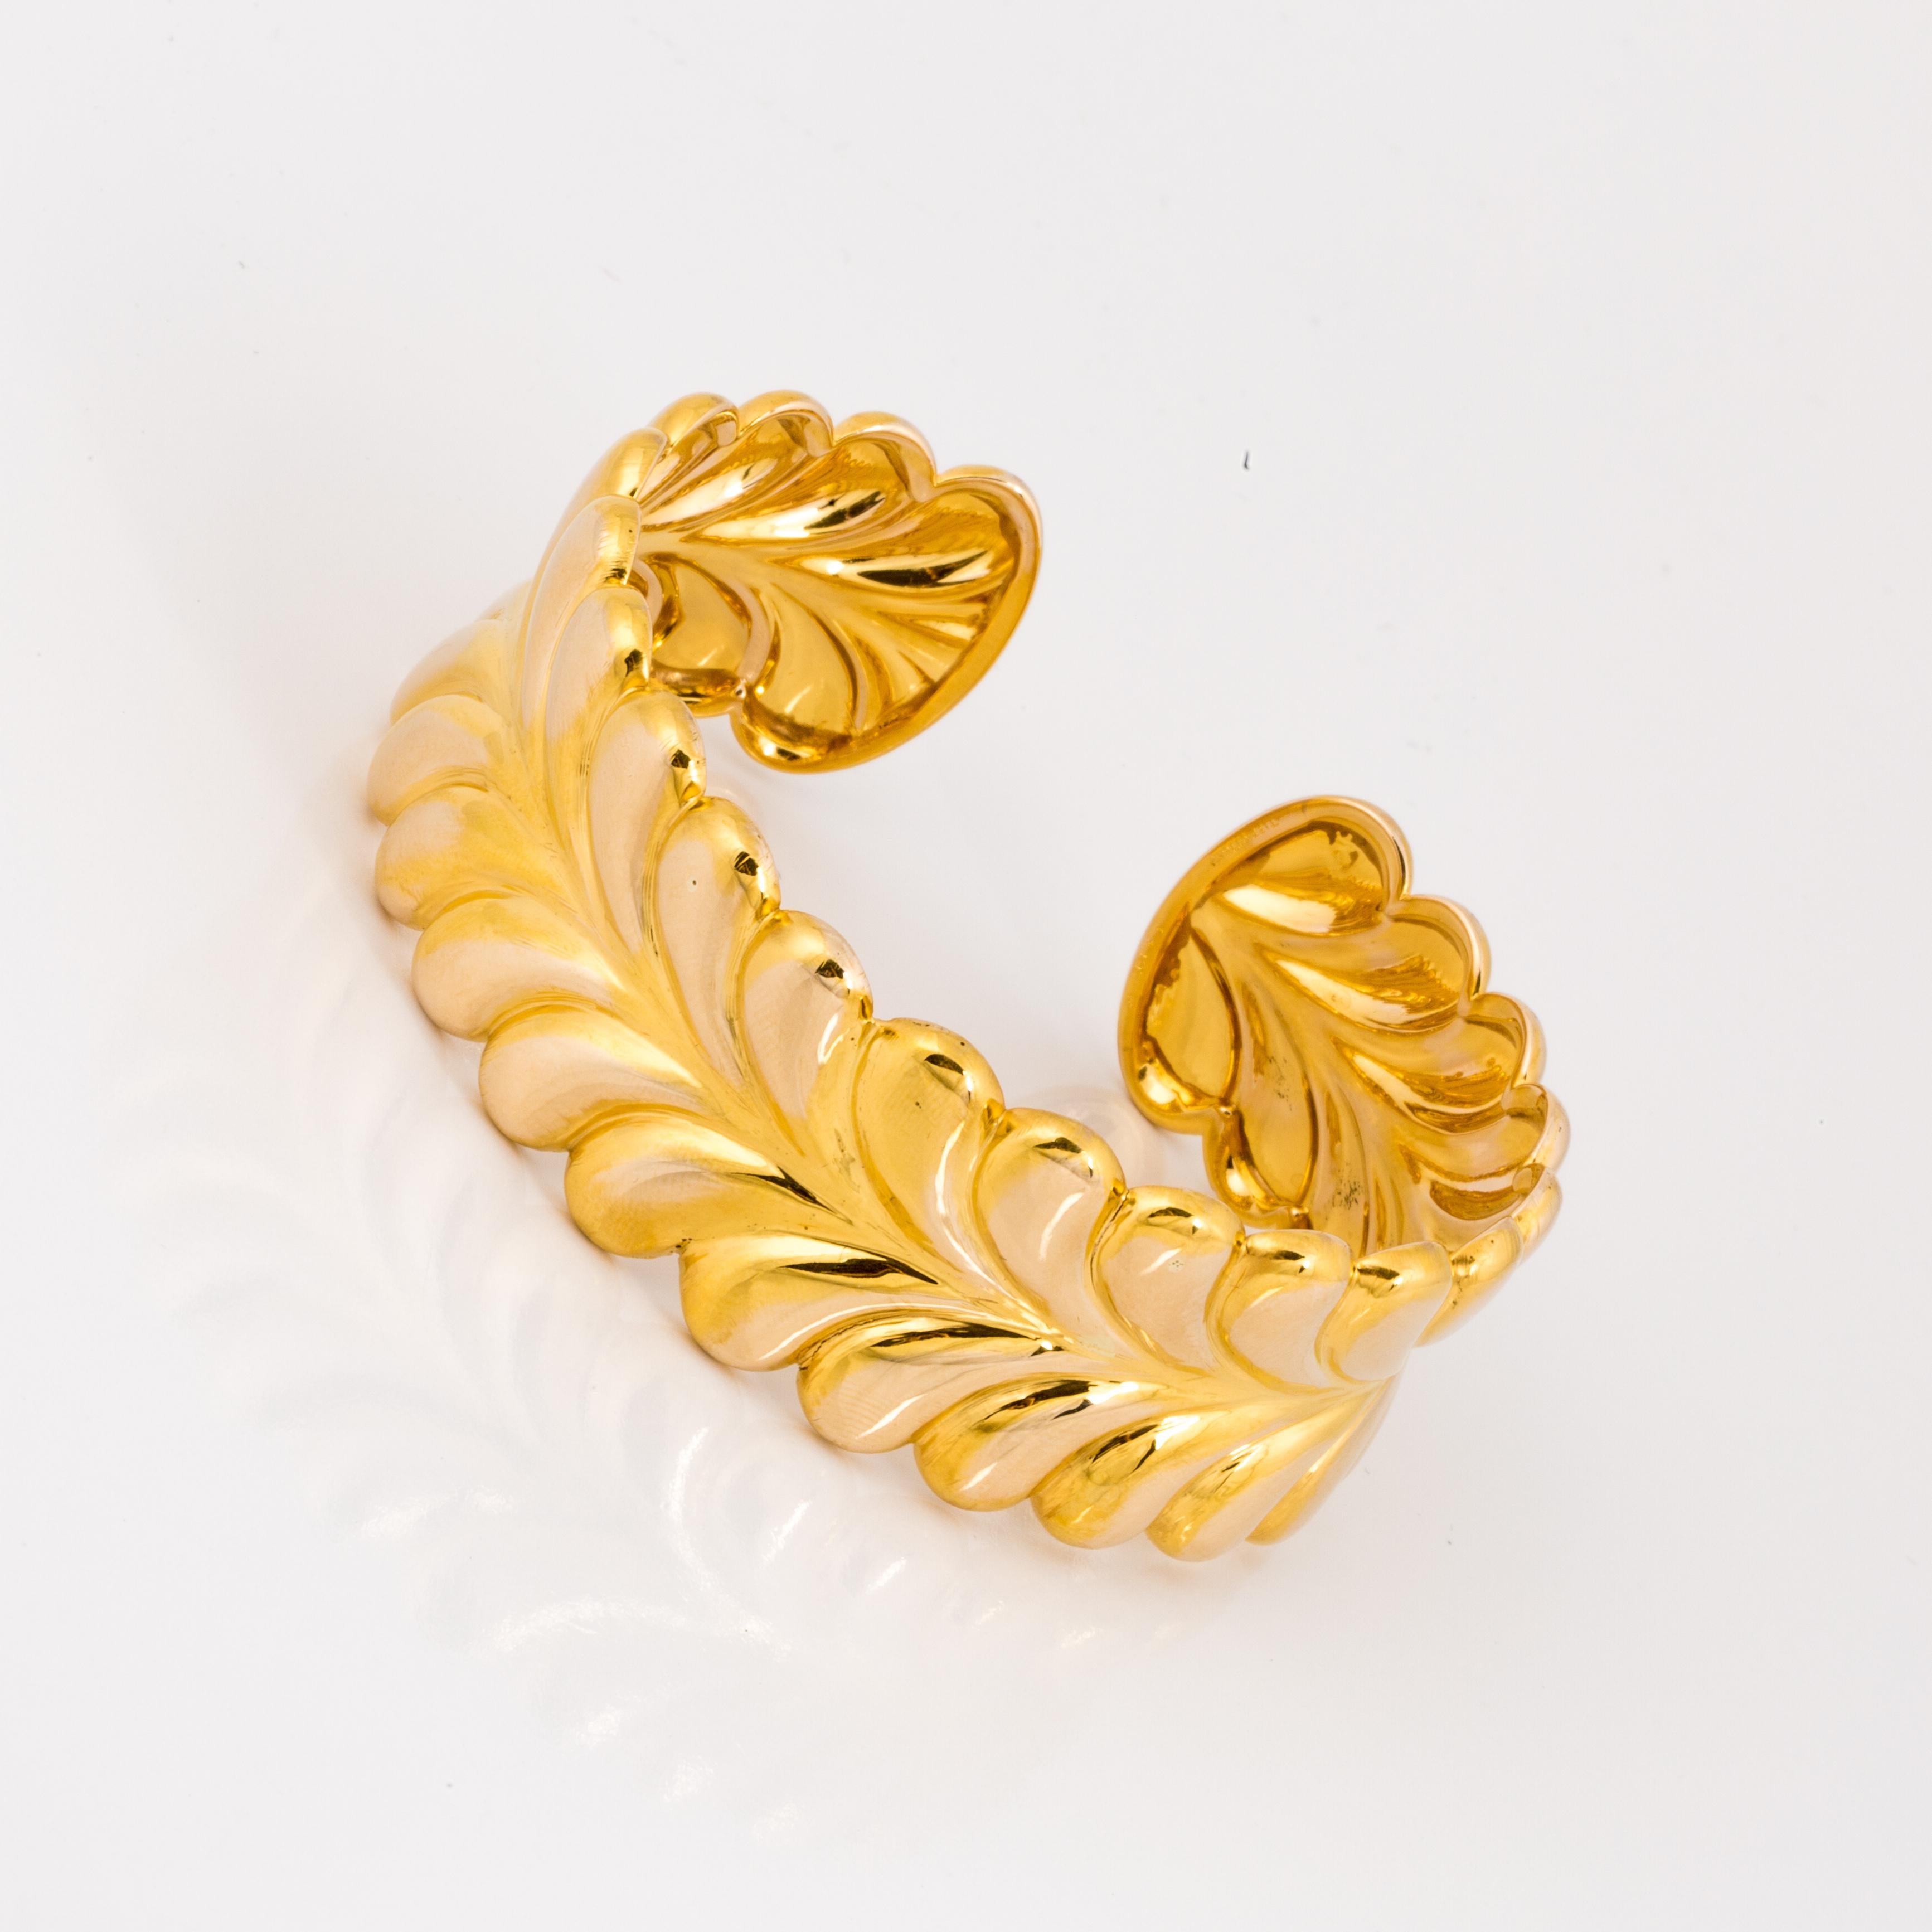 Tiffany & Co. 14K yellow gold cuff style bracelet with a gathered design.  It measures 1 inch in width and the oval opening is 2 1/2 inches.  